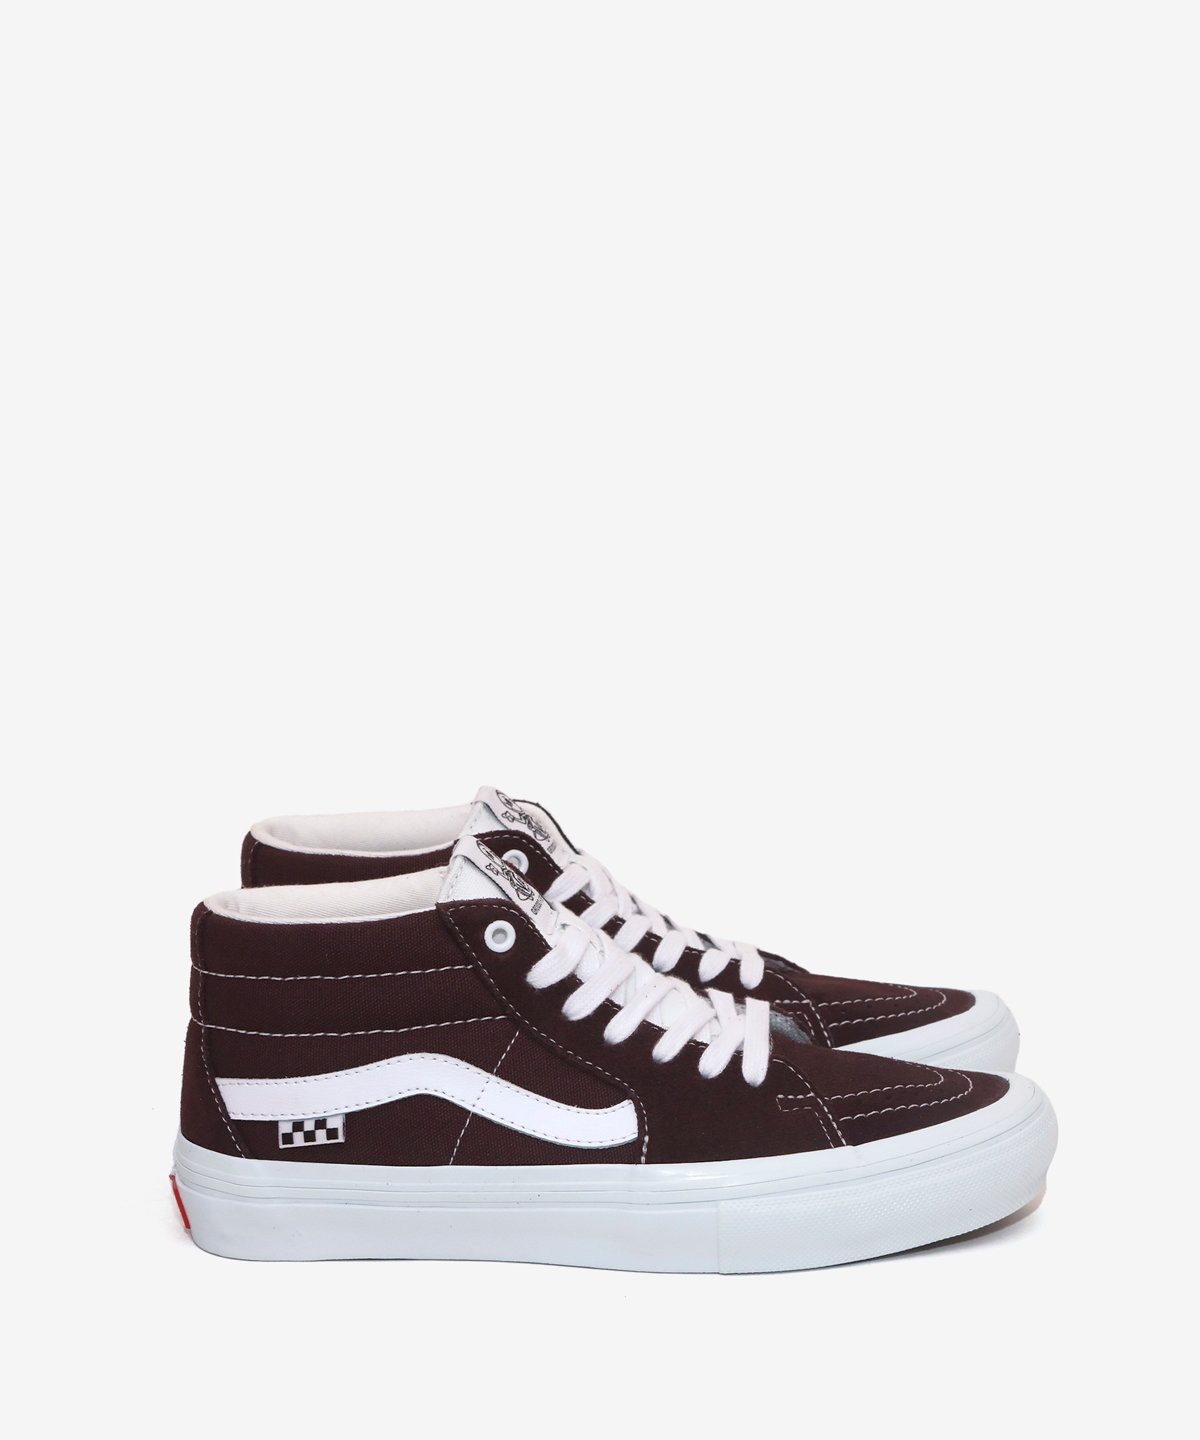 Image of VANS_SKATE GROSSO MID (WRAPPED) :::WINE:::